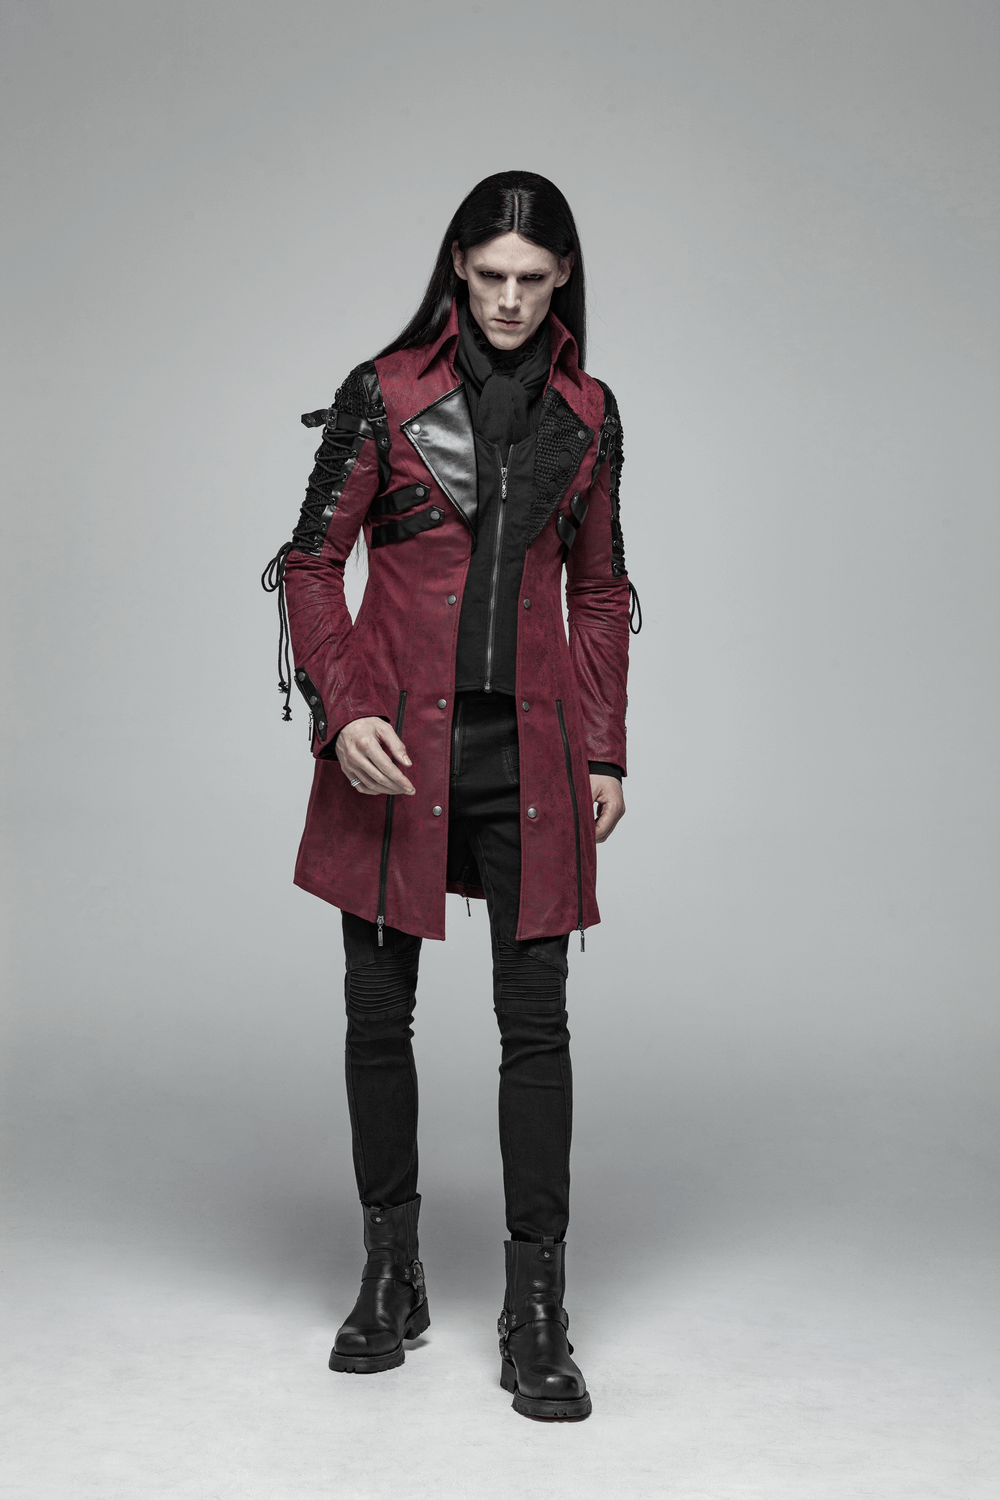 Gothic Male Leather Trench Coat with Laced Sleeves - HARD'N'HEAVY